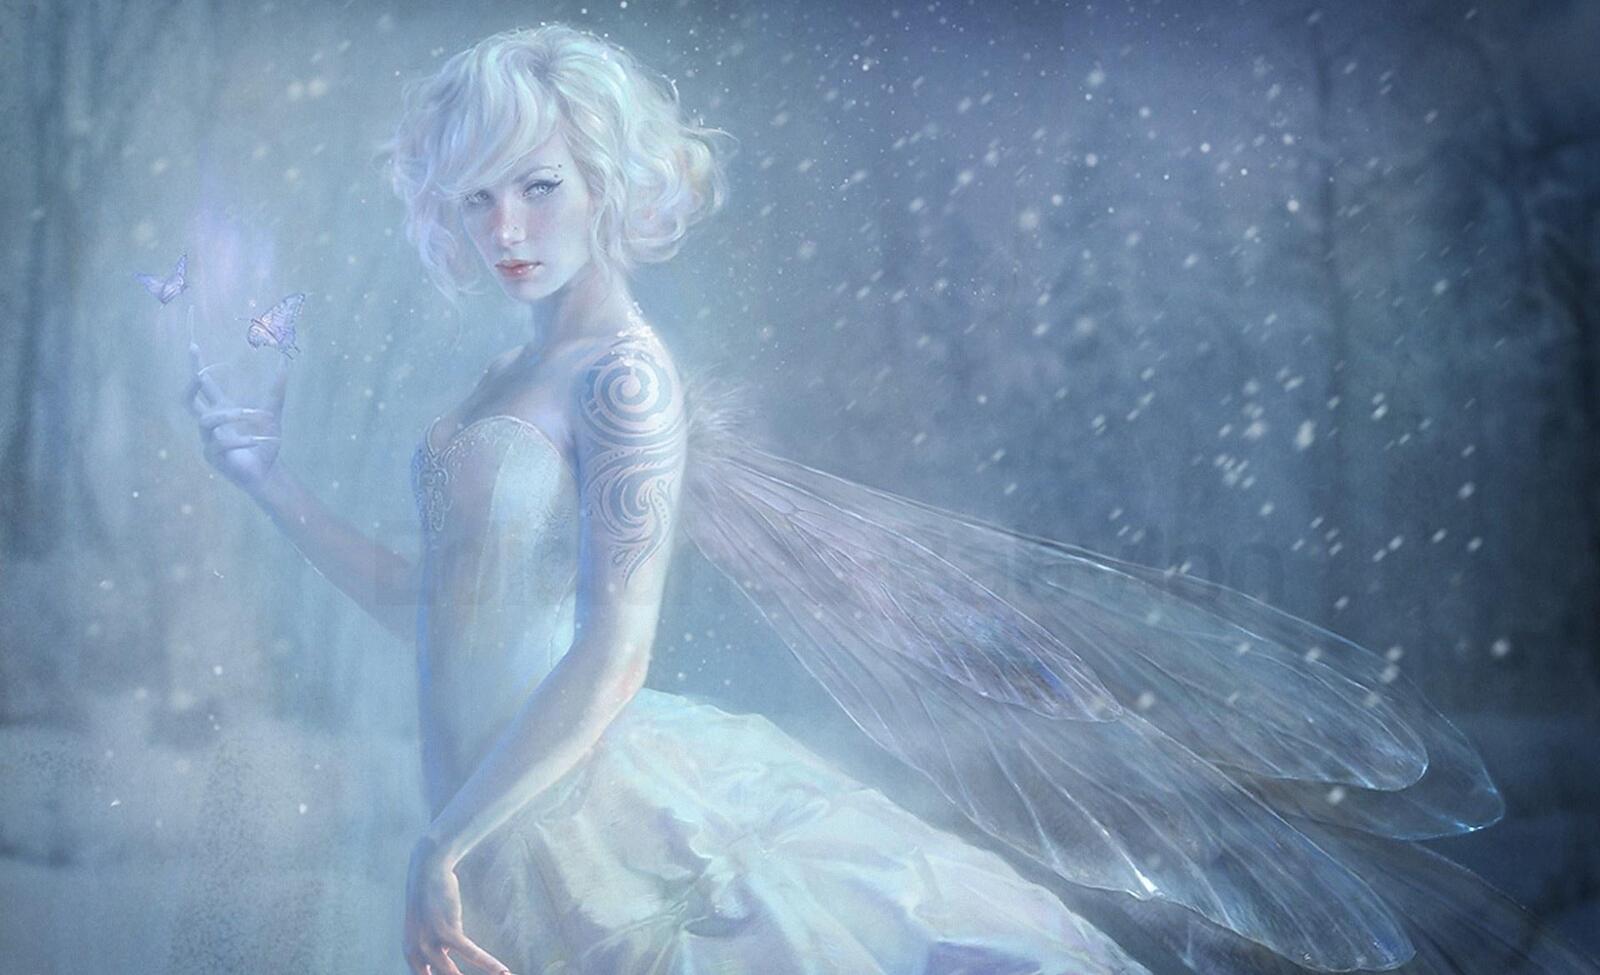 Wallpapers wings snow fairy on the desktop